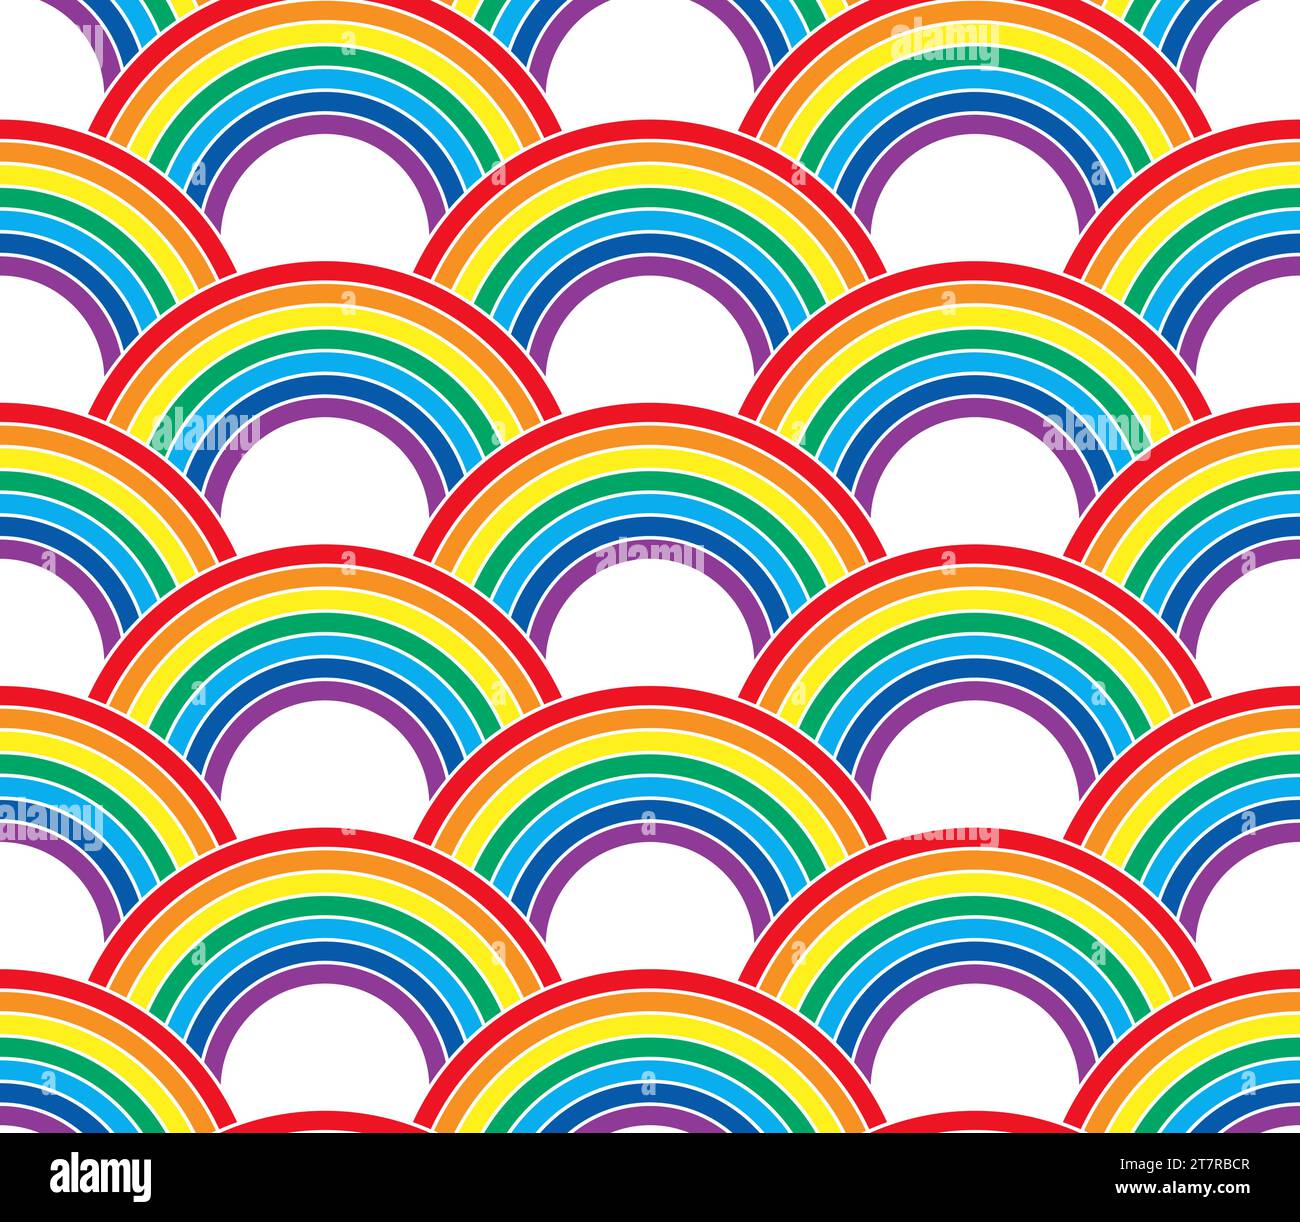 eps vector illustration showing wonderful colored rainbows, seamless background Stock Vector